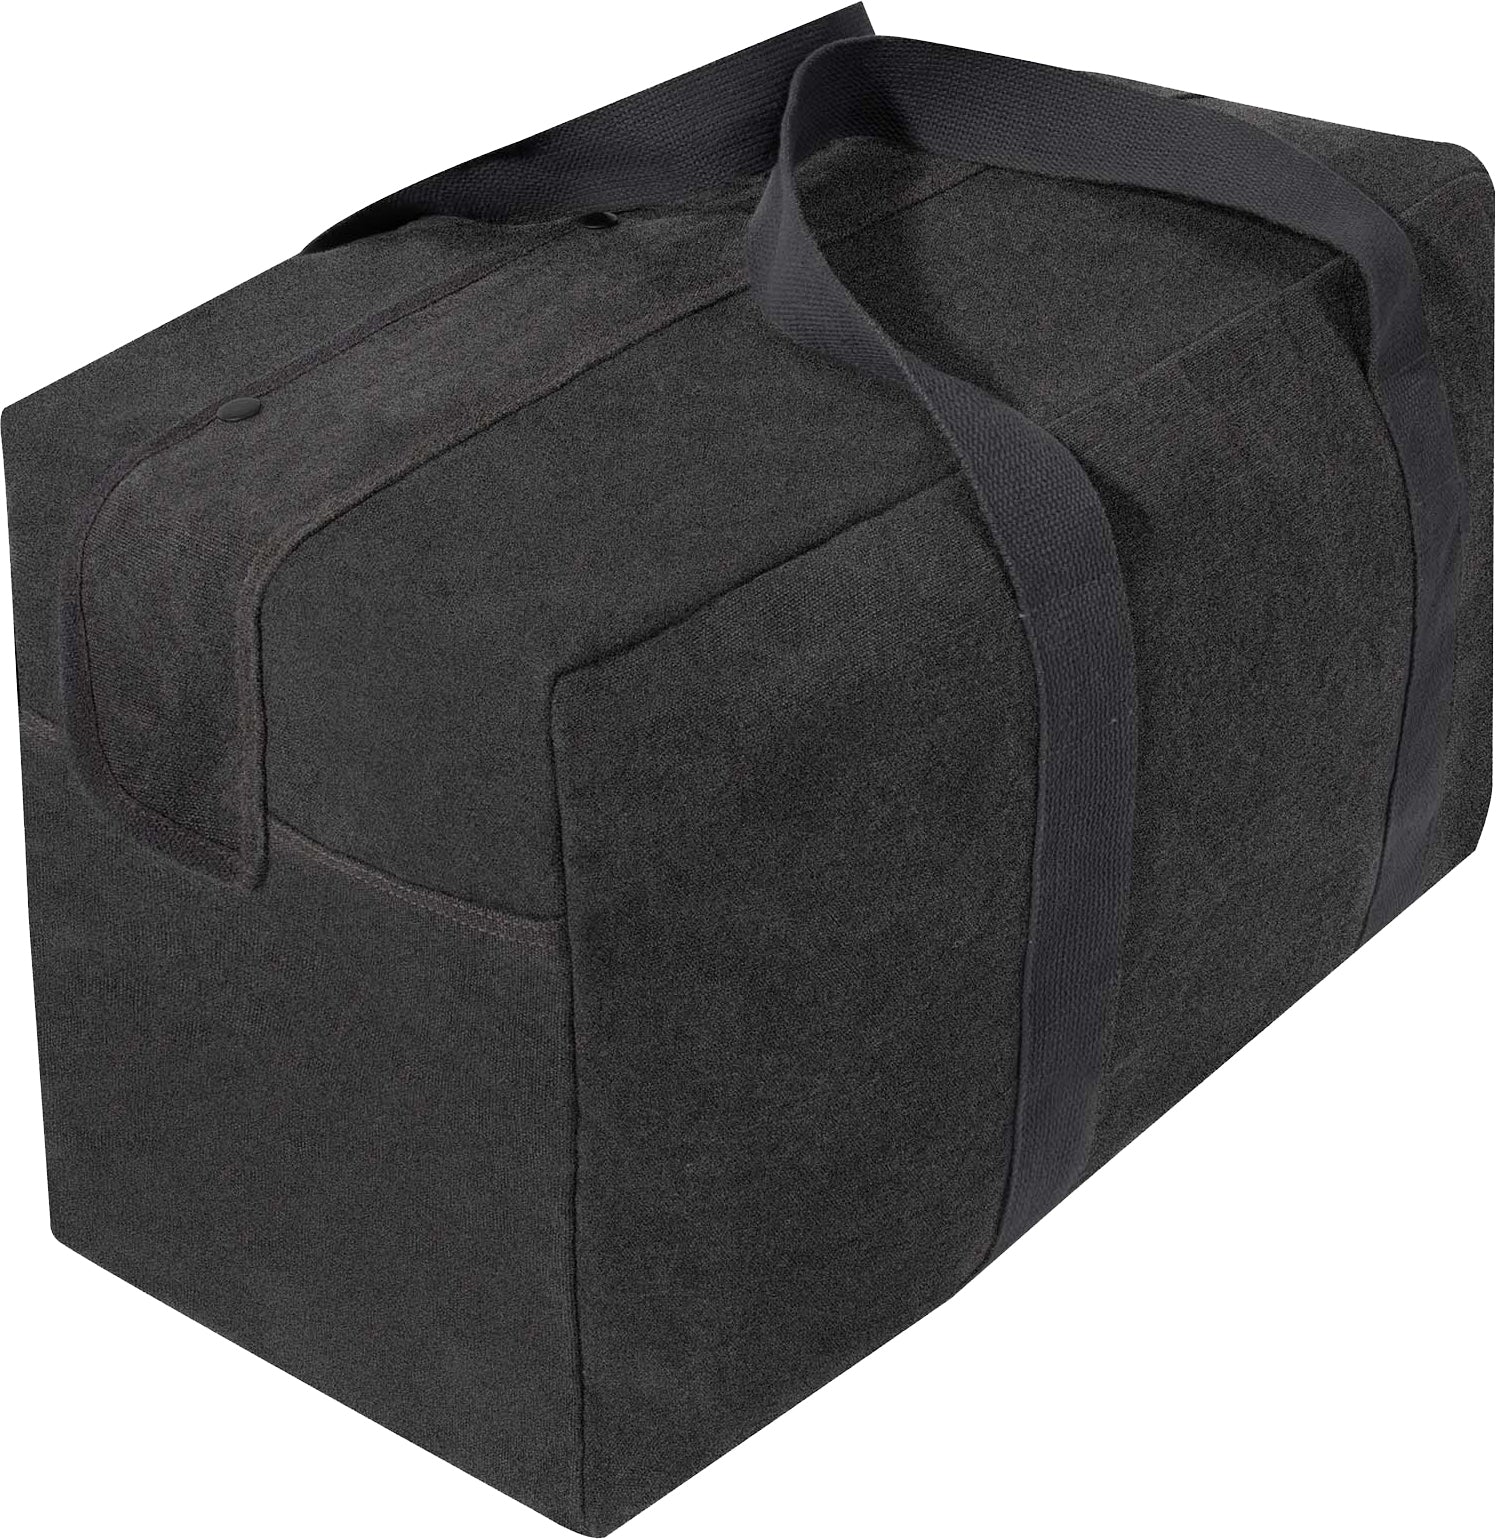 Rothco Canvas Parachute Cargo Bag Extra Large Duffle Bag 75L, Charcoal Grey